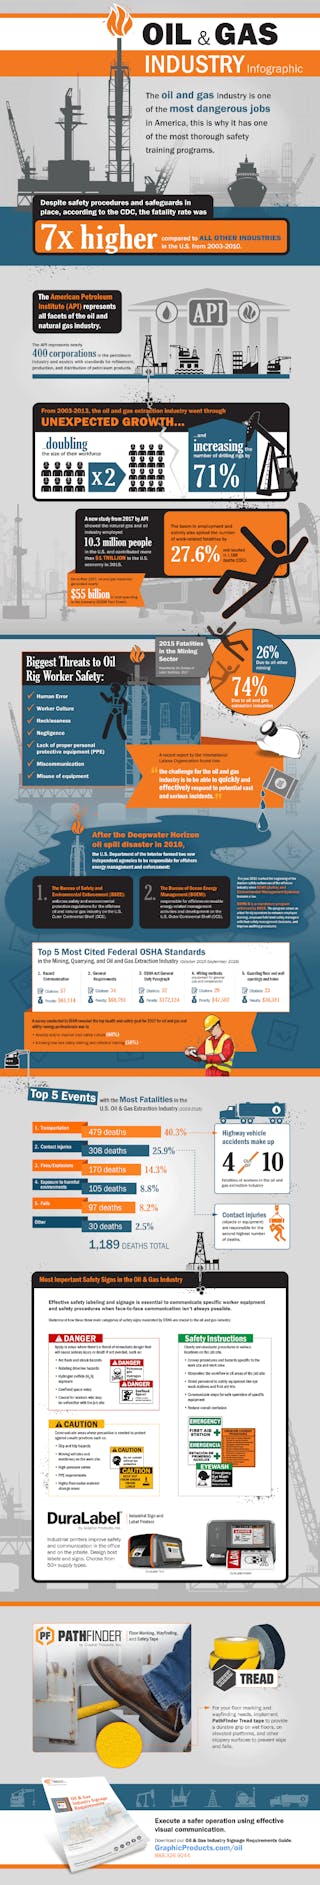 Www Ehstoday Com Sites Ehstoday com Files Oil Gas Industry Infographic